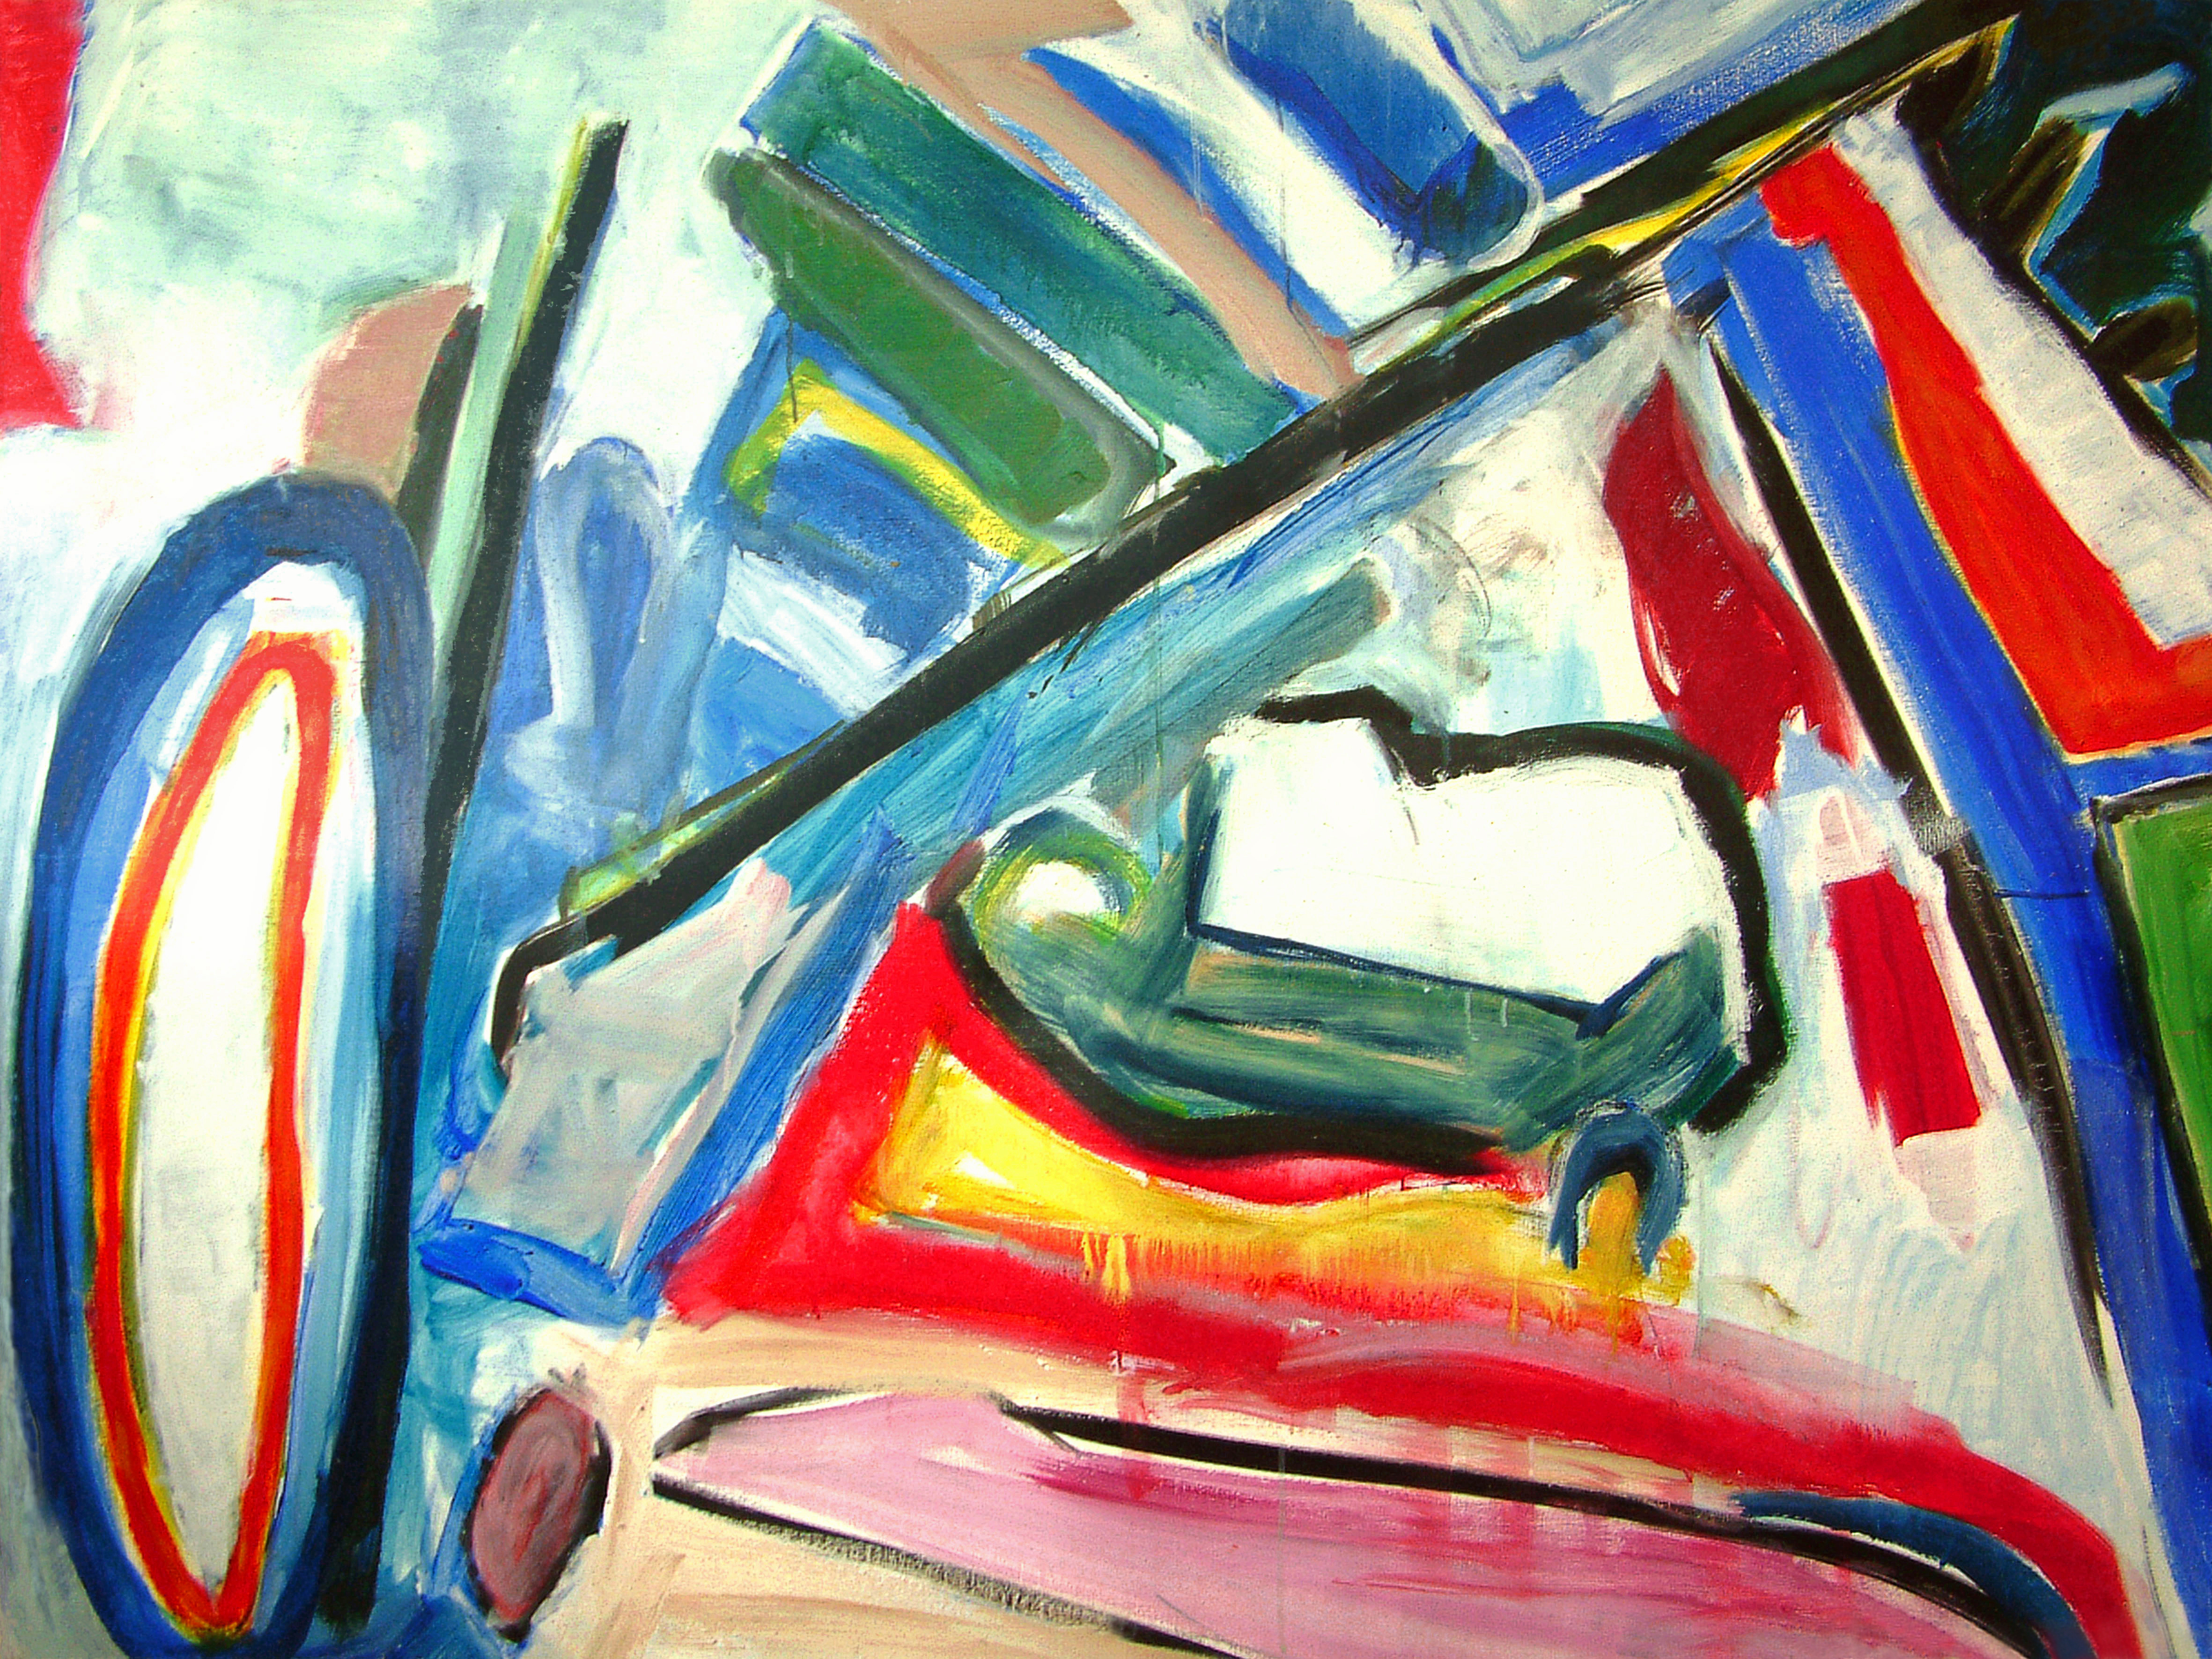 1989 - 'Large Seascape & Diagonal', acrylic large painting on canvas, Dutch Abstract Expressionism art / colorful painting on canvas - A high resolution art image in free download to print, in public domain / Commons, CC-BY. - groot abstract schilderij, Abstract, Painter, High_resolution, Image, HQ Photo